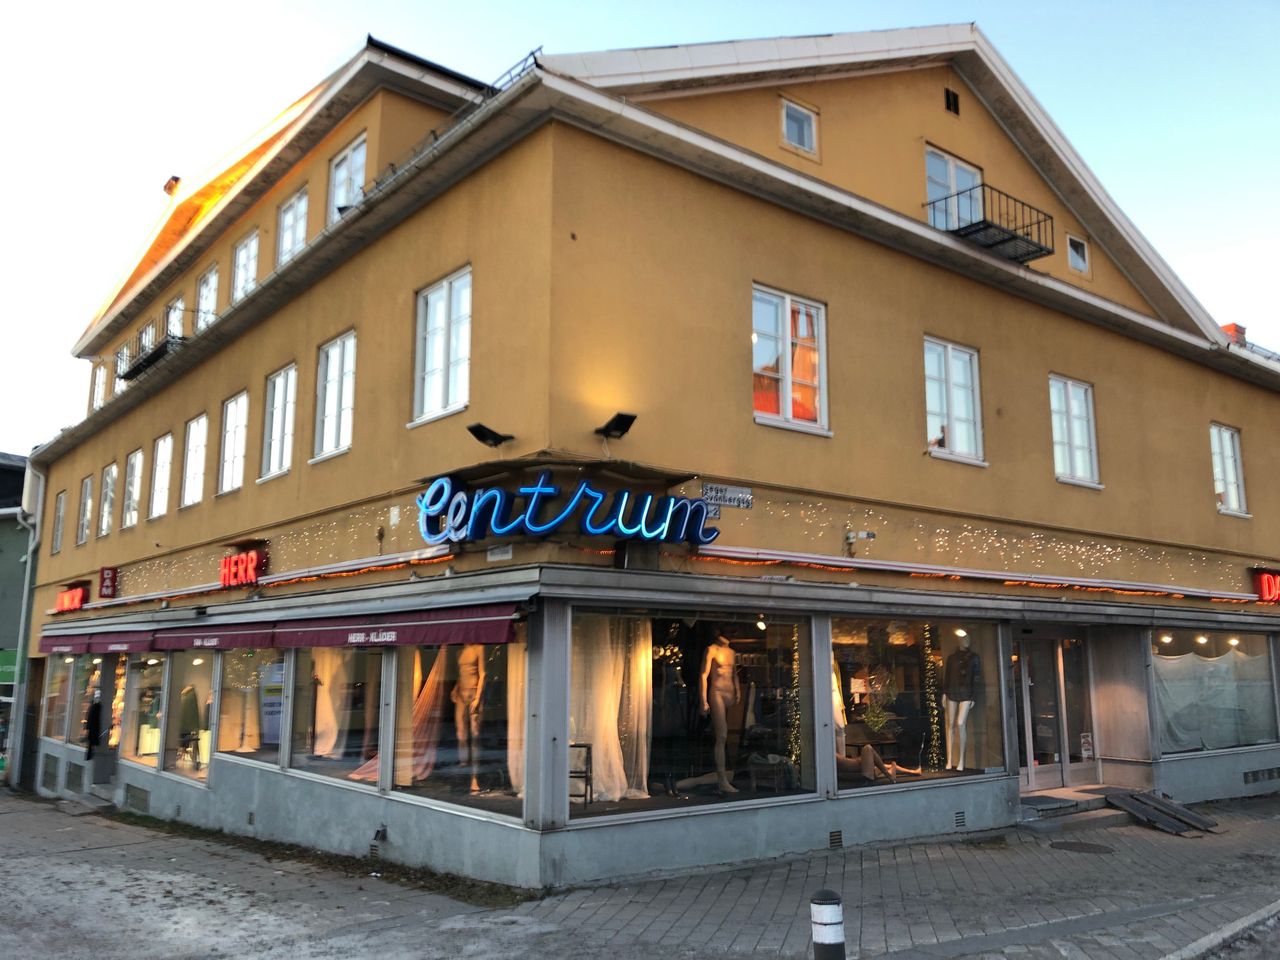 Centrum, a clothing store and landmark in Kiruna's existing city center.